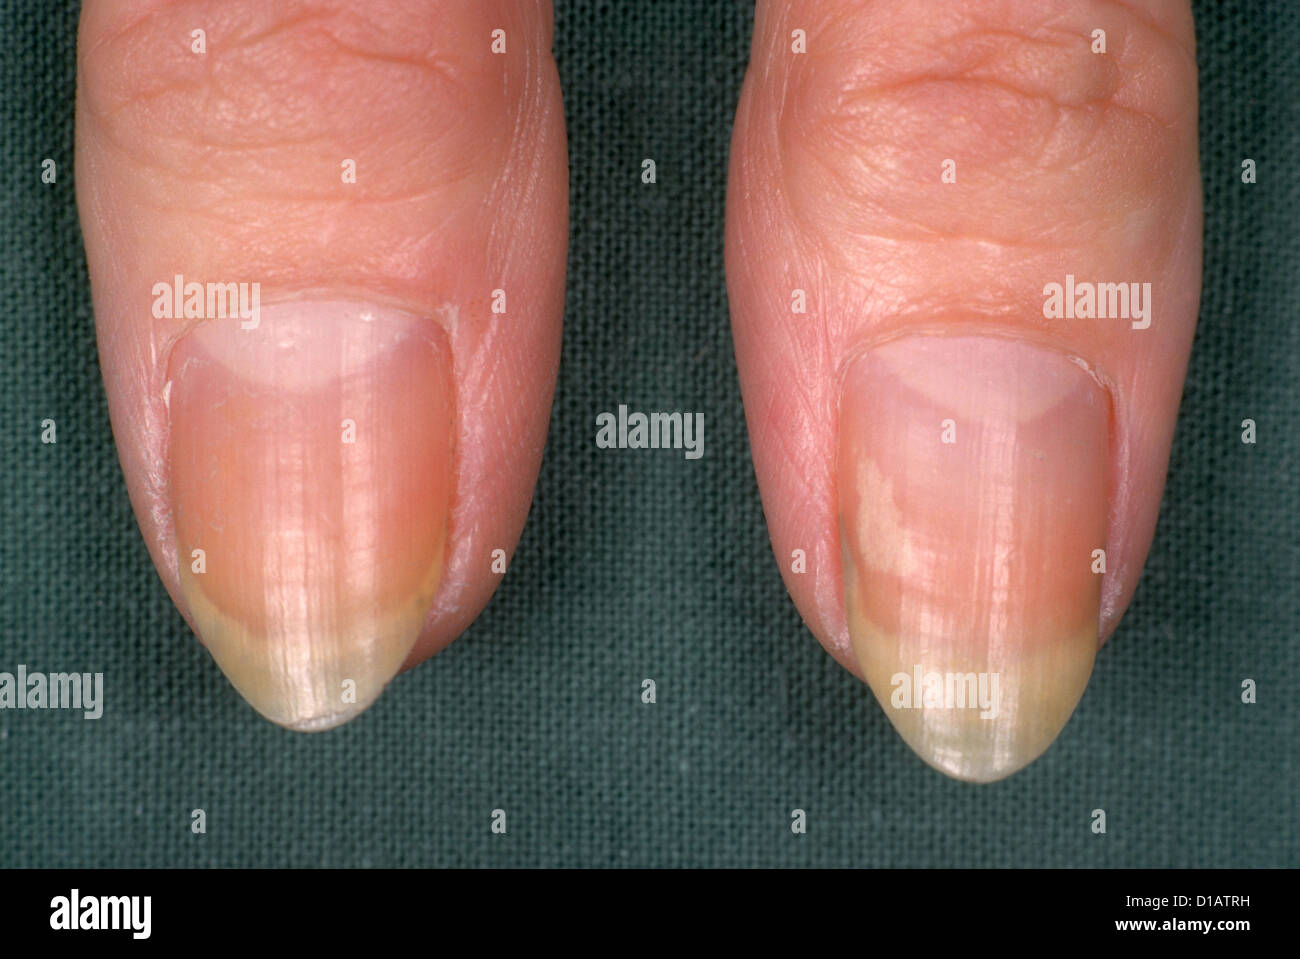 Habit Tic Nail Deformity - American Osteopathic College of Dermatology  (AOCD)